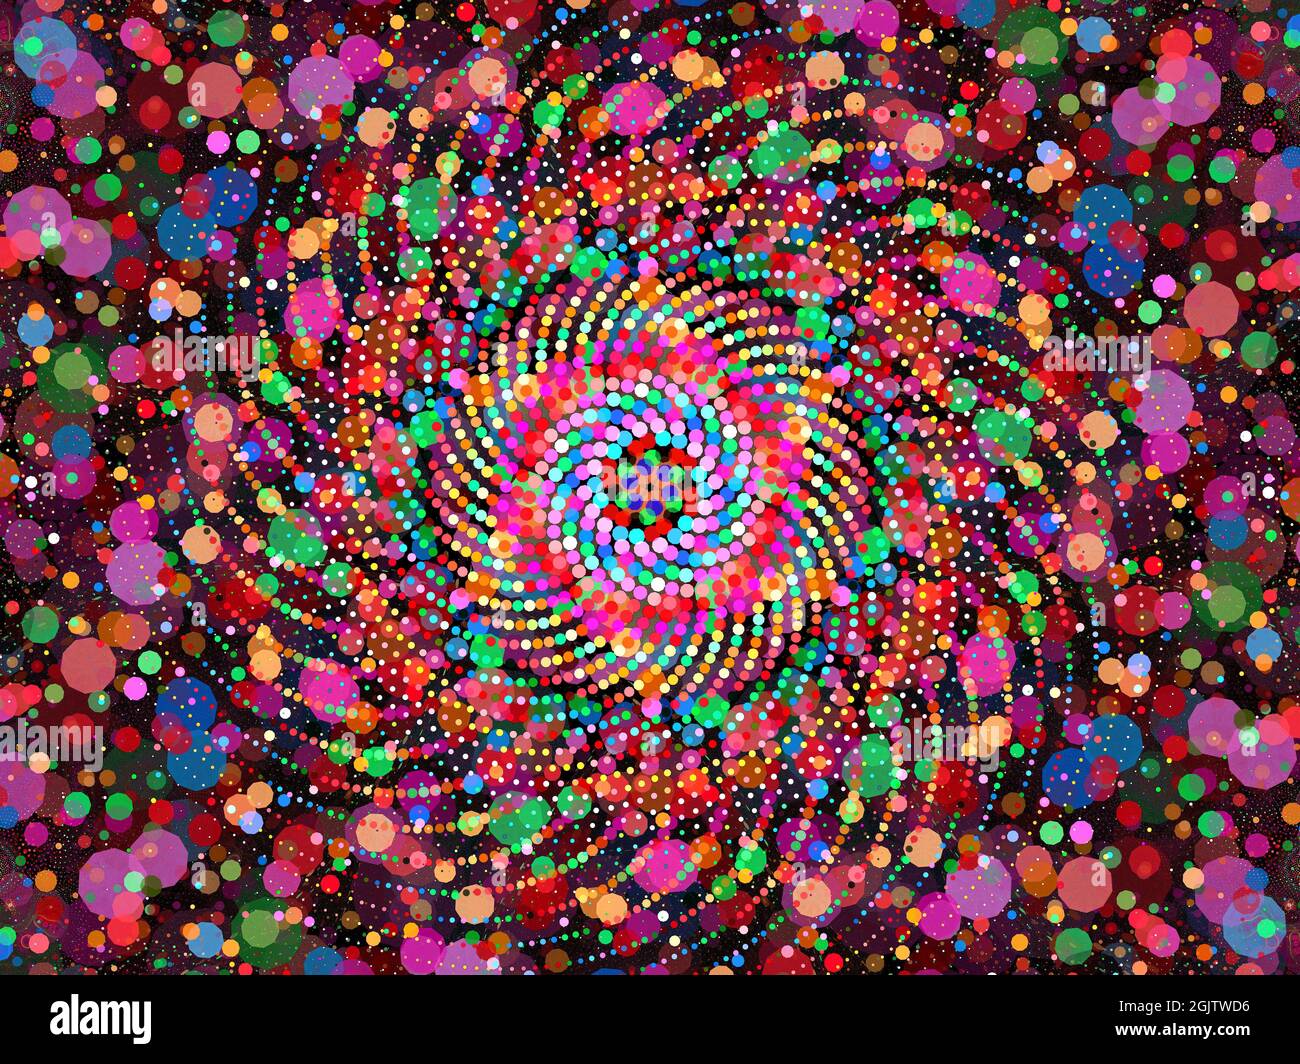 Colourful Dotted Circle Swirl Stock Photo